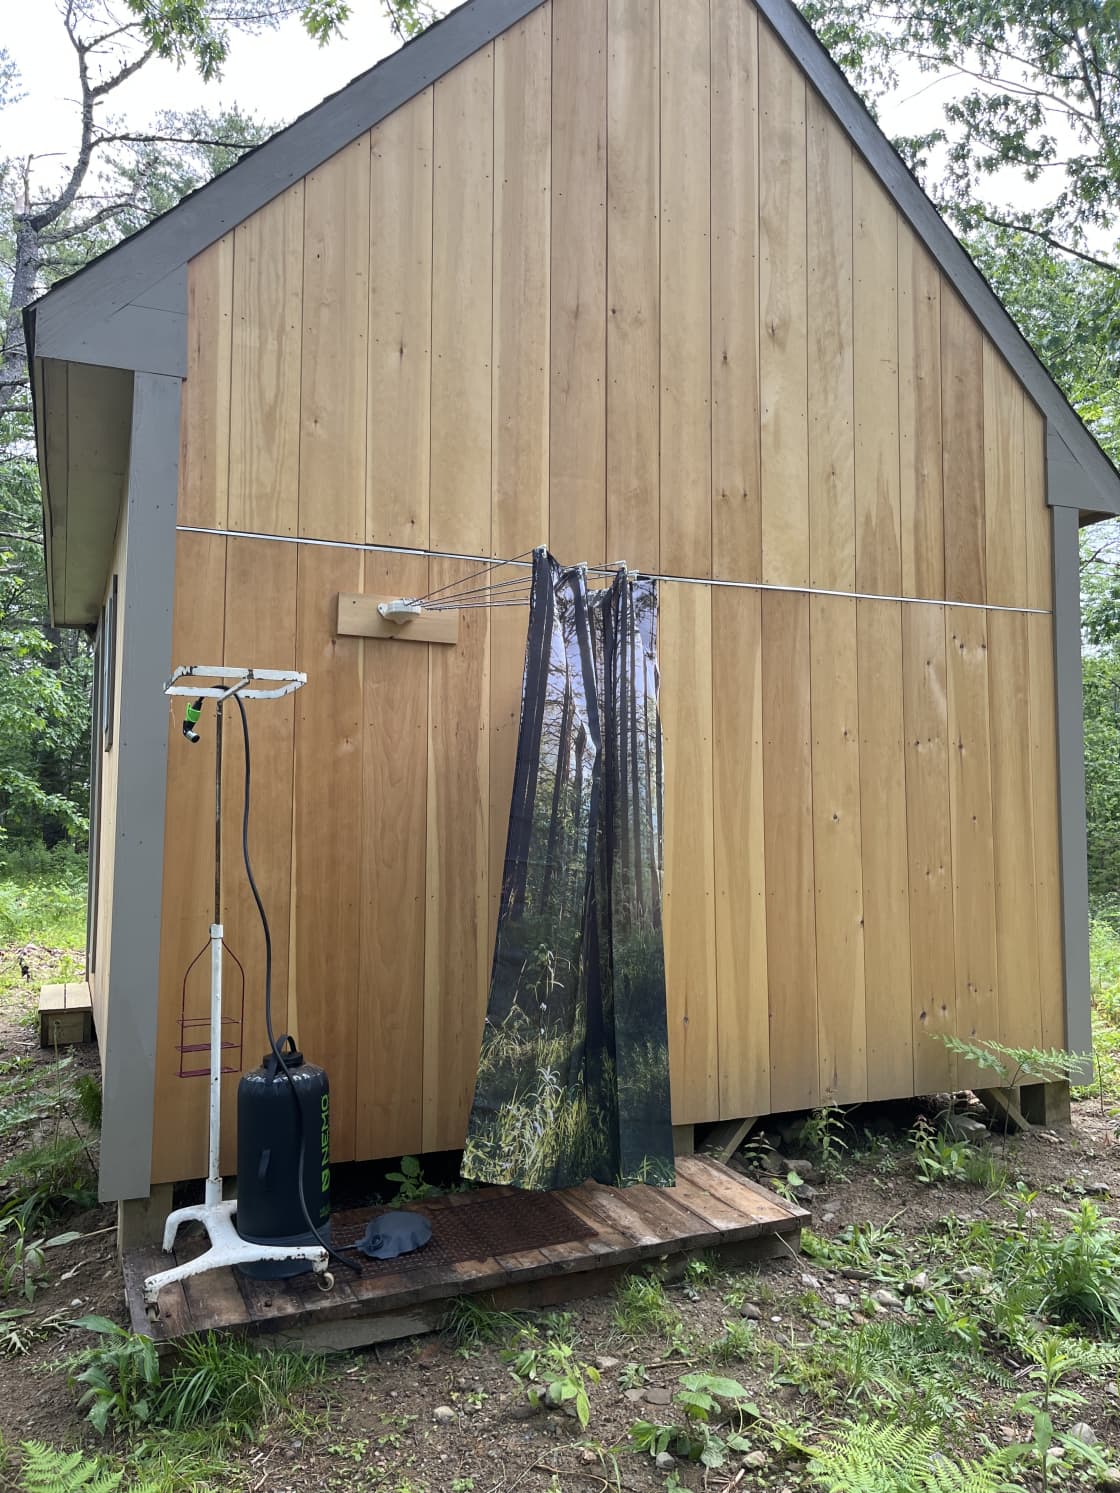 Solar shower station with pressurized foot pump